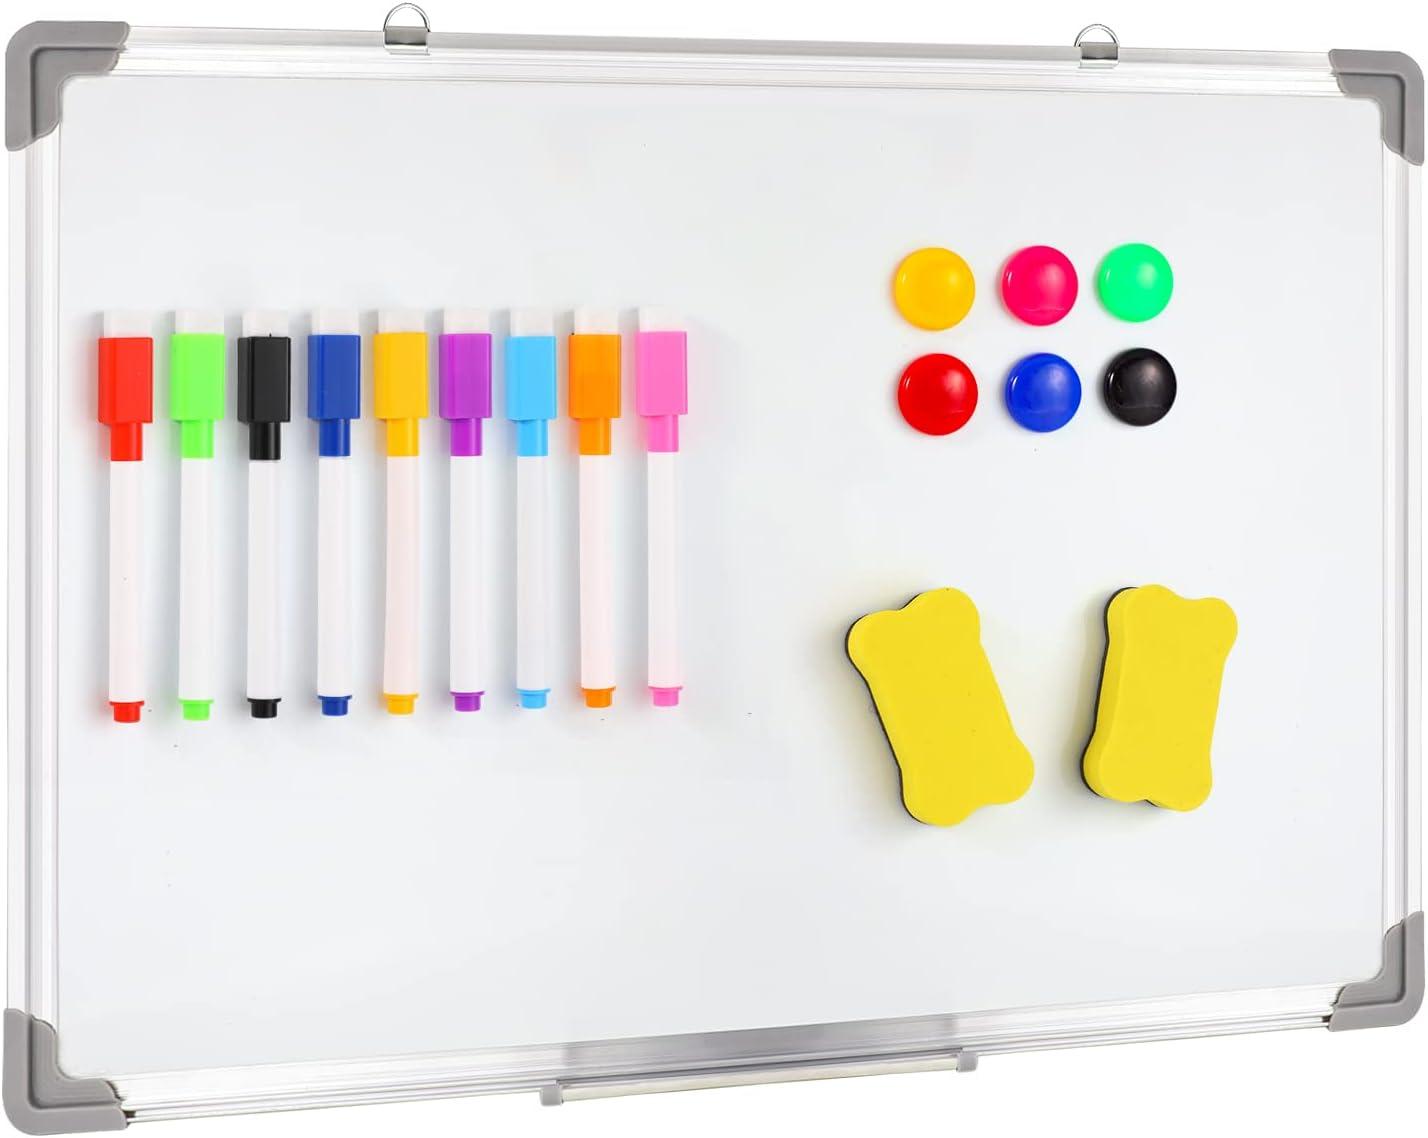 veylin large whiteboard for wall 40 x 60cm dry erase white board magnetic whiteboard for office home school